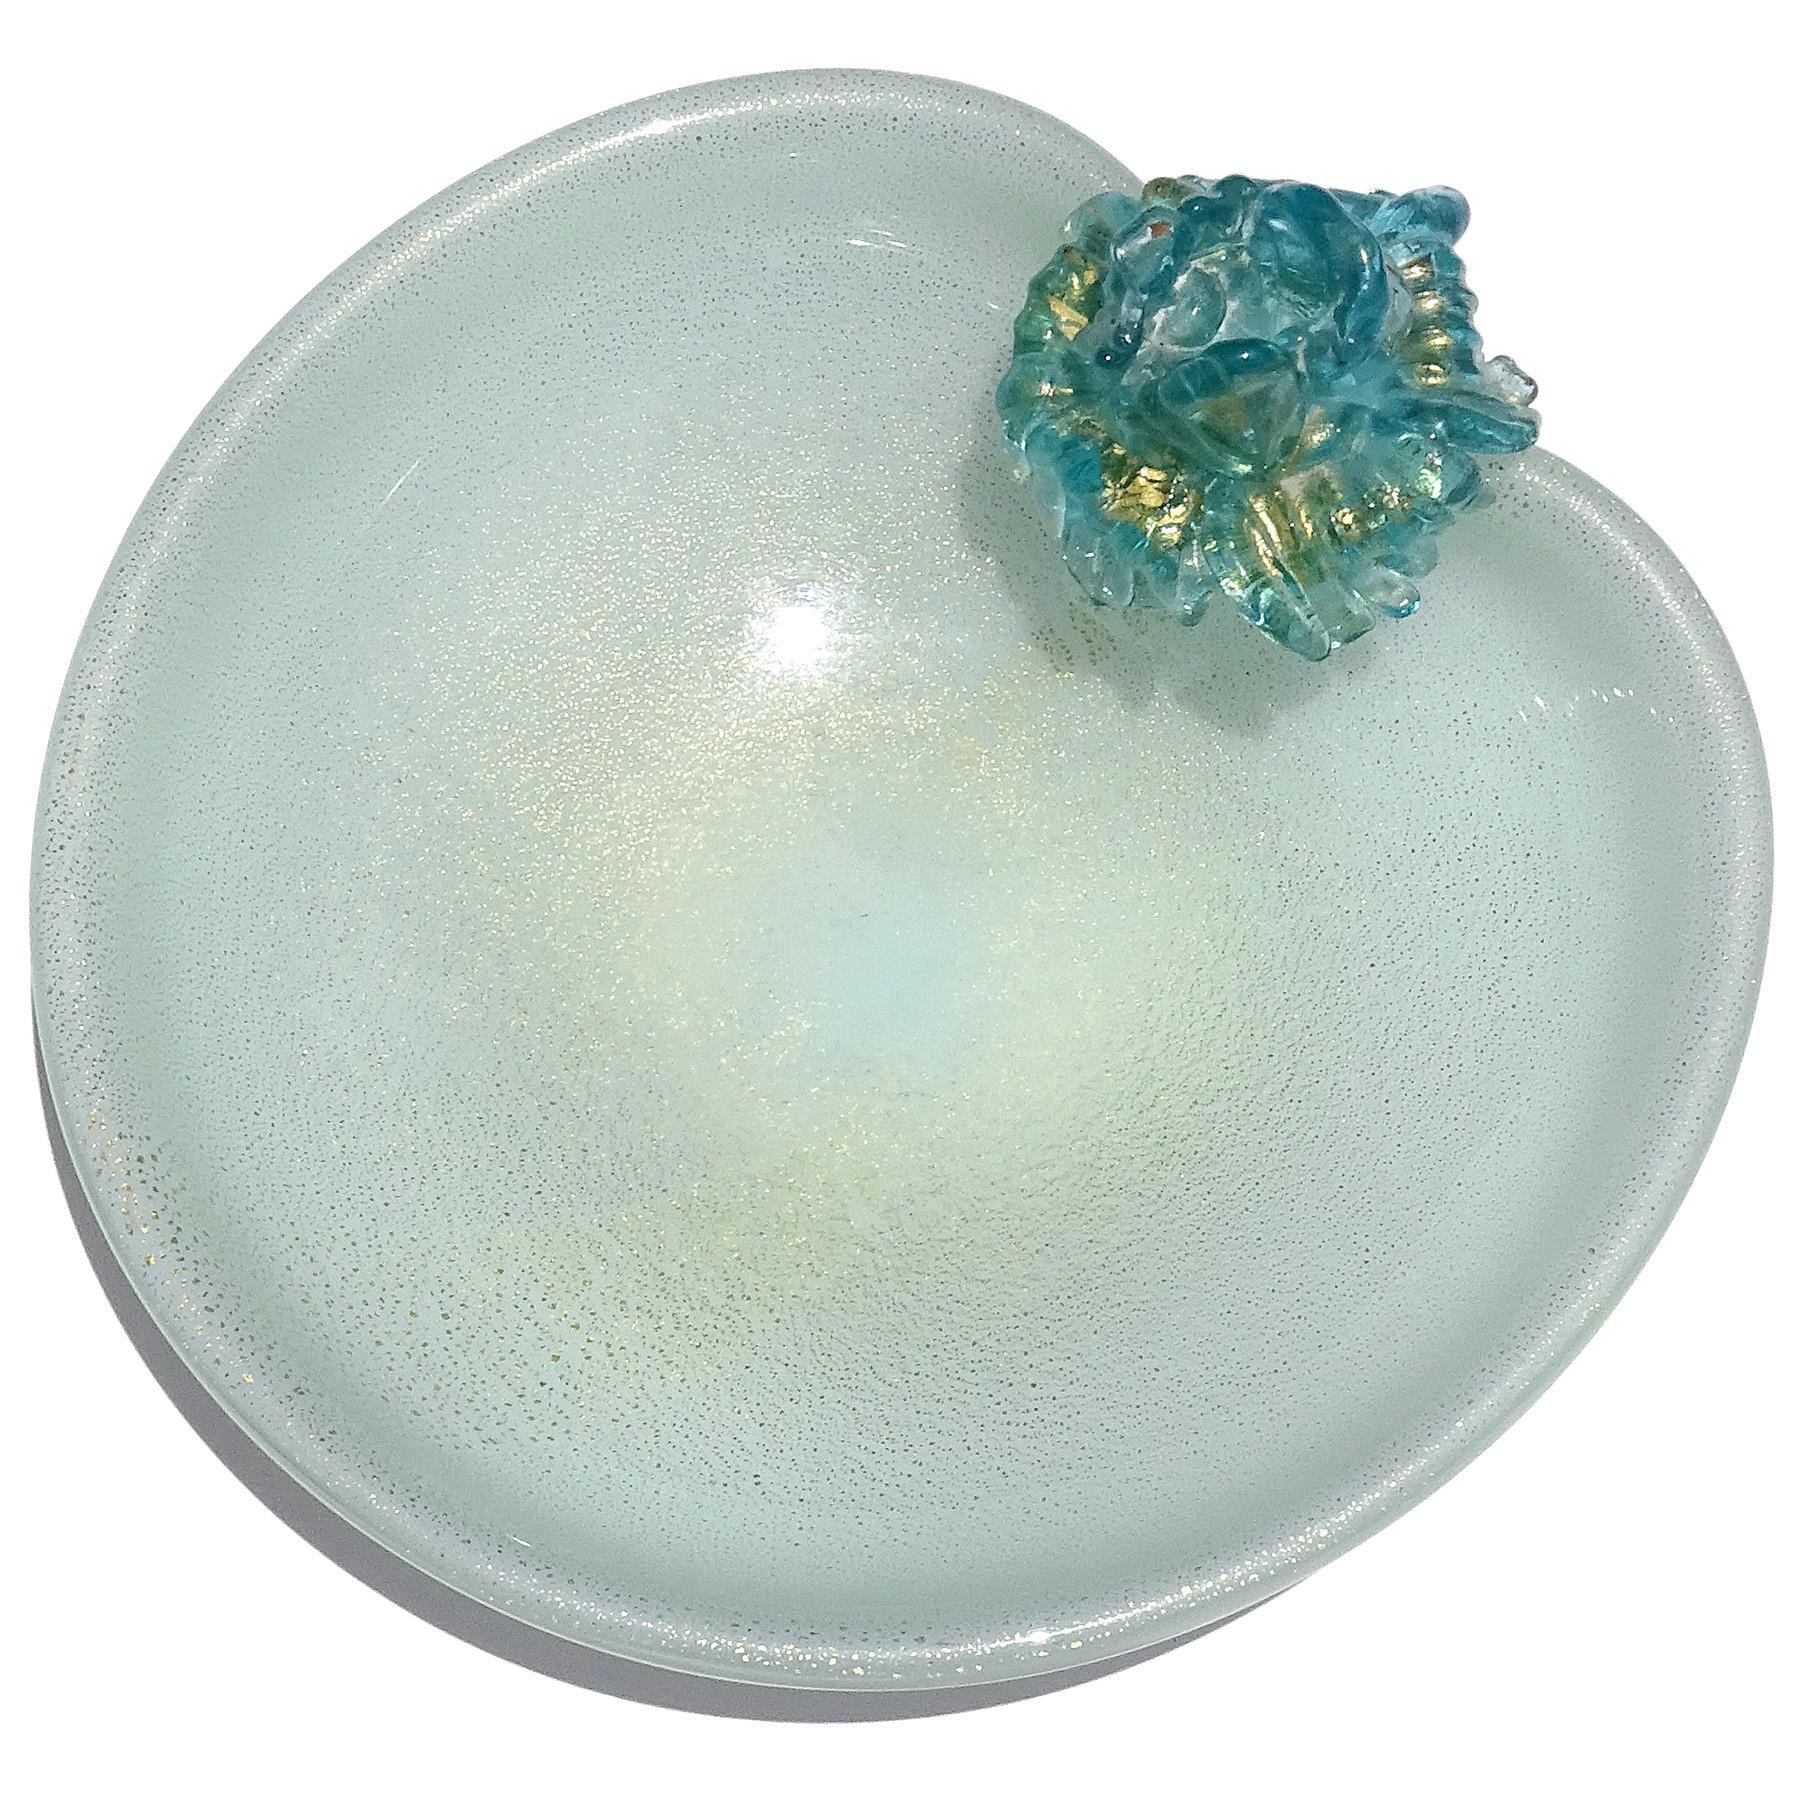 Beautiful vintage Murano hand blown light blue, white and gold flecks Italian art glass decorative vide-poche bowl. Attributed to designer Archimede Seguso. The bowl has an applied blue and gold leaf flower placed at the top edge of the rim. The